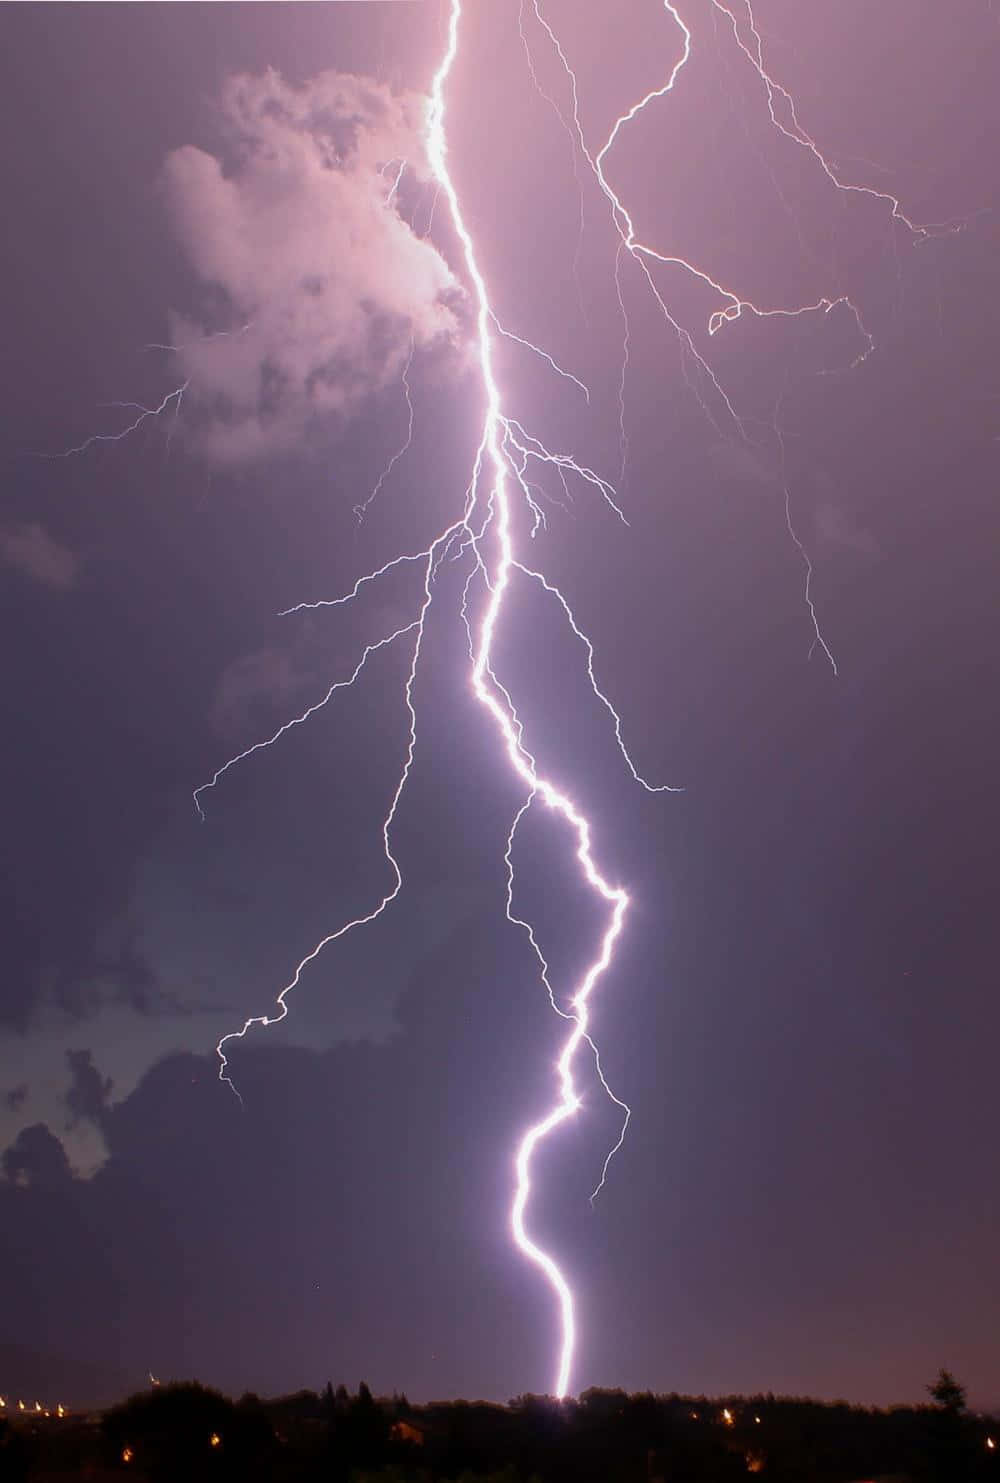 Strikingly Cool Lightning Strikes Over A Clear Night Sky Wallpaper